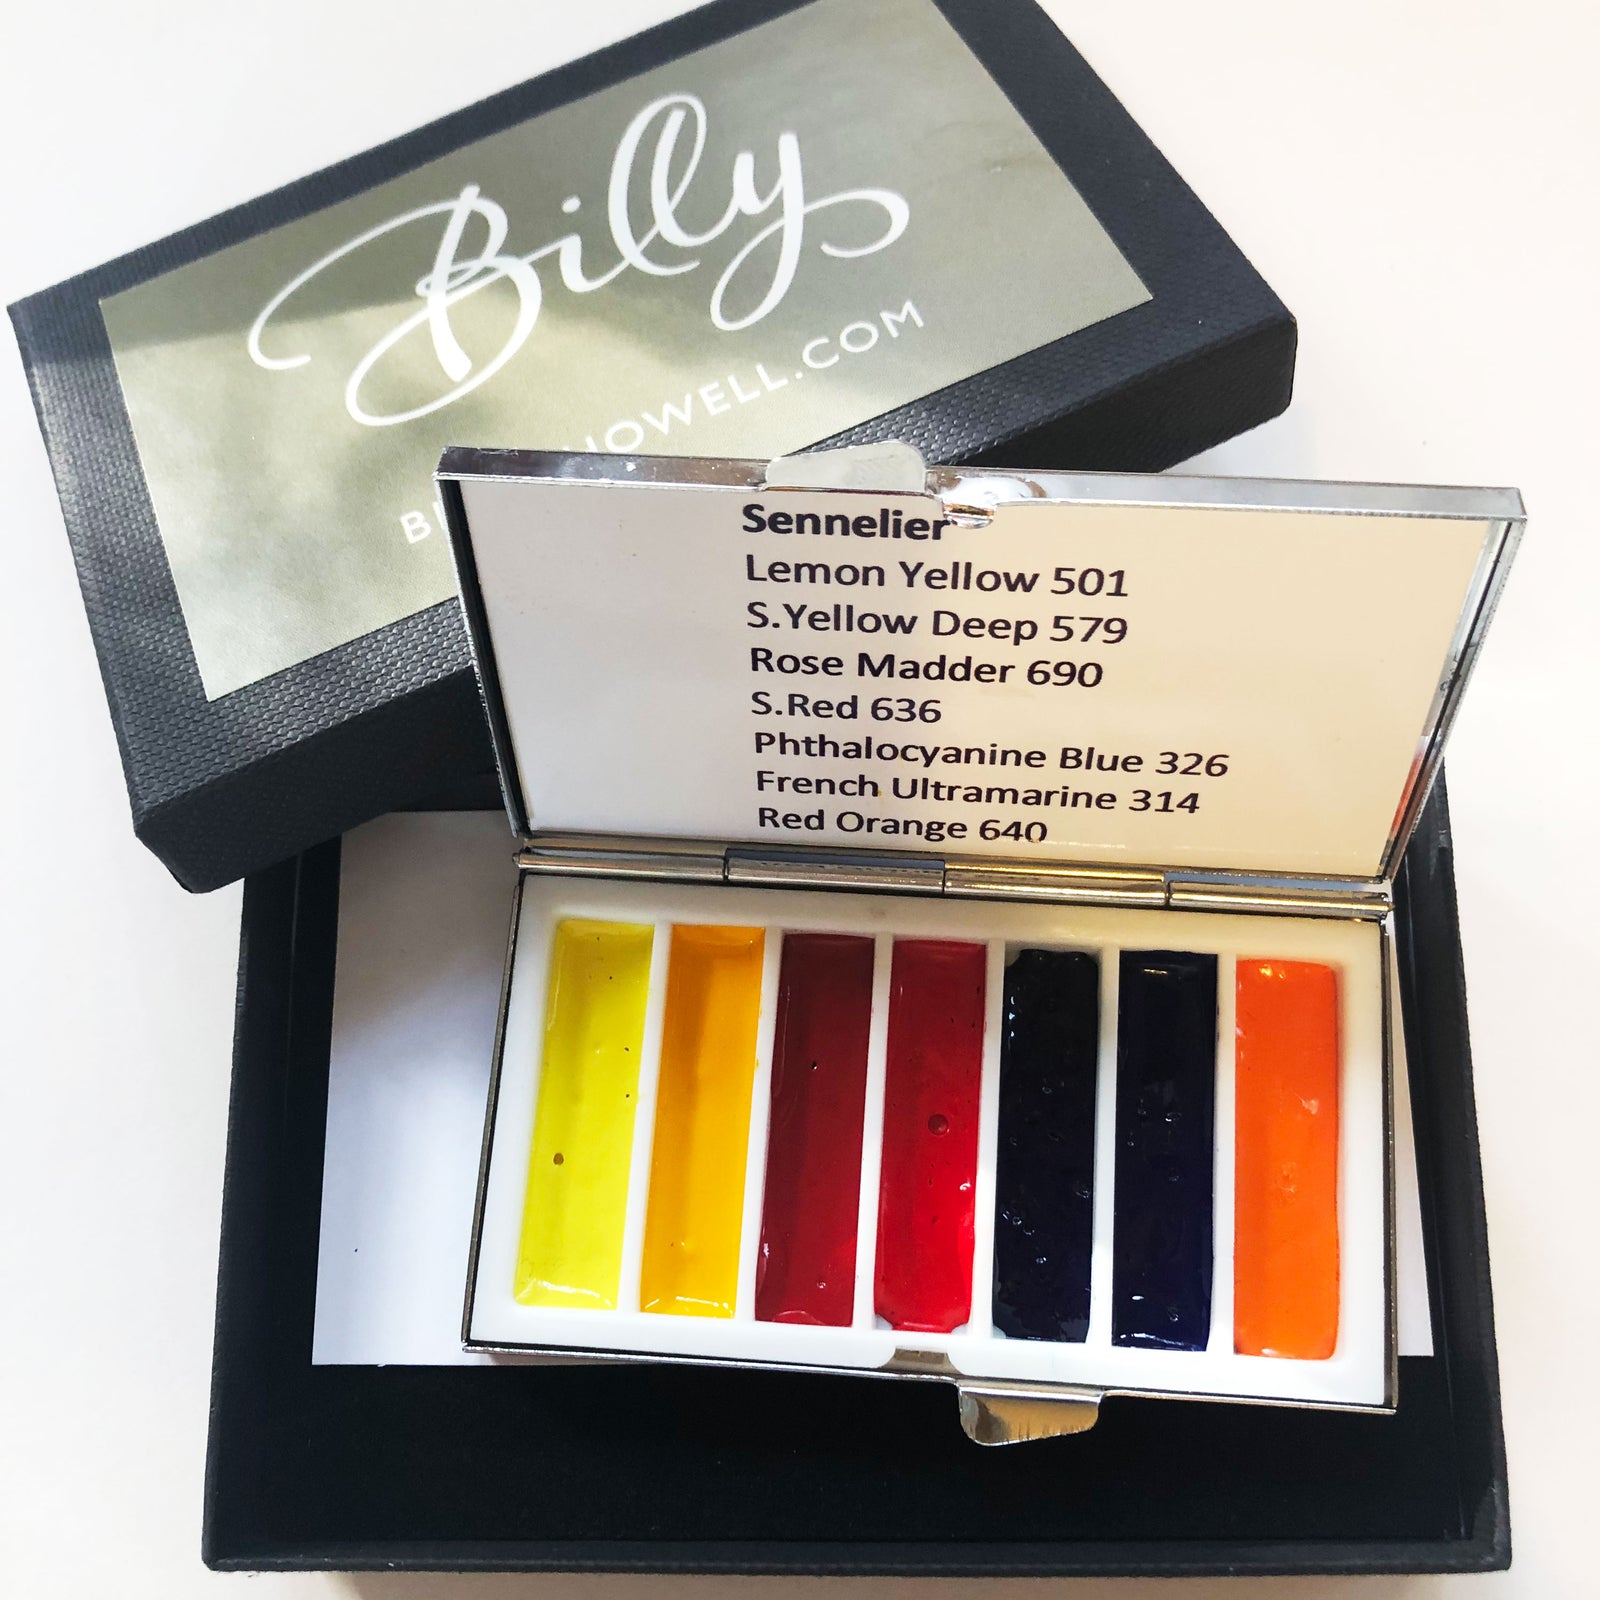 Billy Showell Botanical Watercolor Paint Complete Set - 18 Colors -  WaterColourHoarder